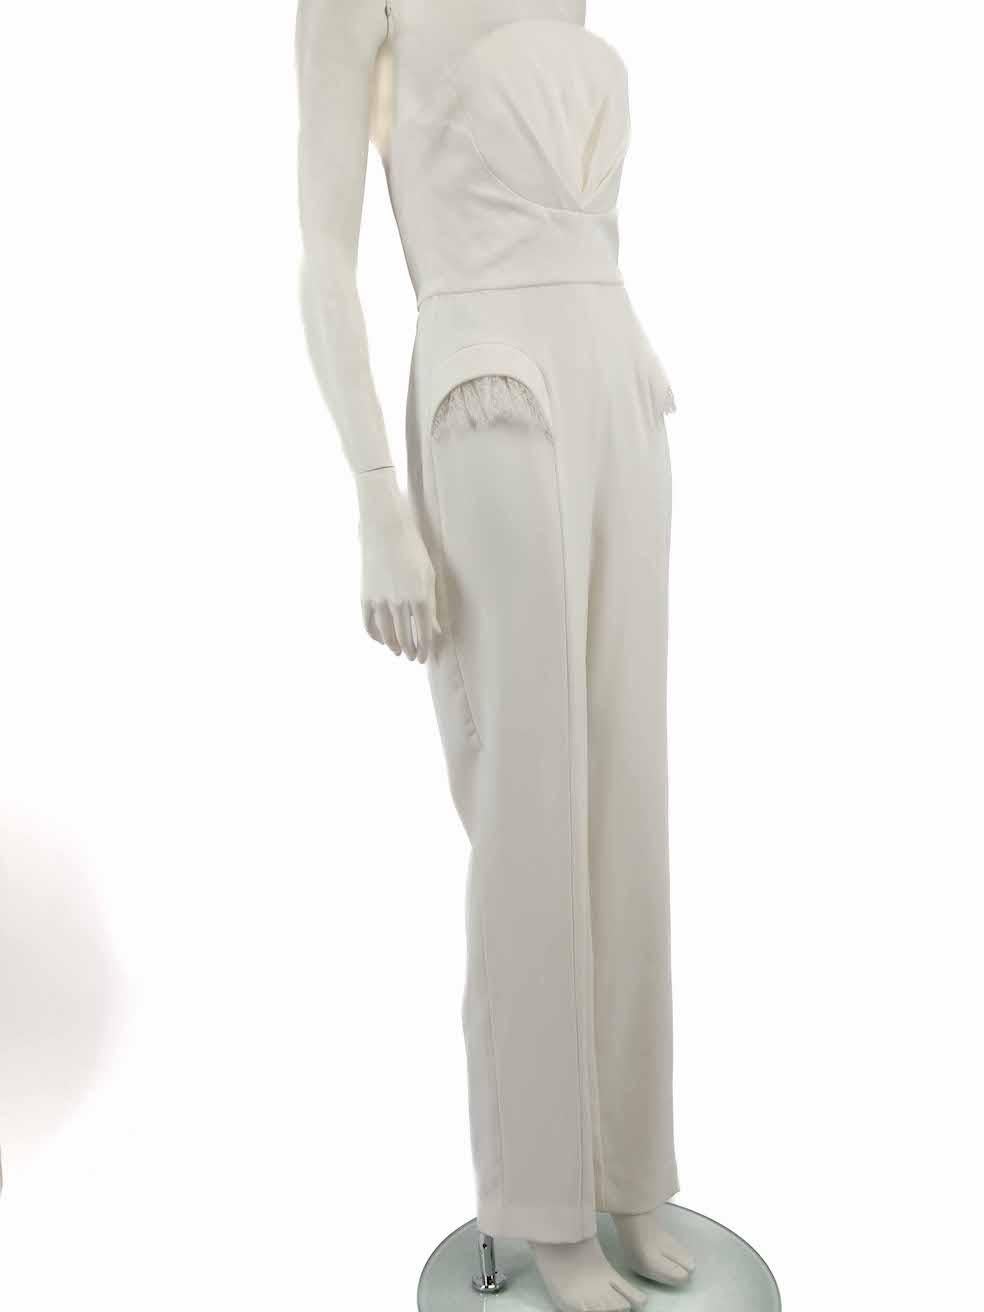 CONDITION is Very good. Minimal wear to jumpsuit is evident. Minimal wear to leg cuffs with discolouration and pilling. Discolouration may need gentle hand washing contrary to dry clean instructions on this used Honayda designer resale item.
 
 
 
